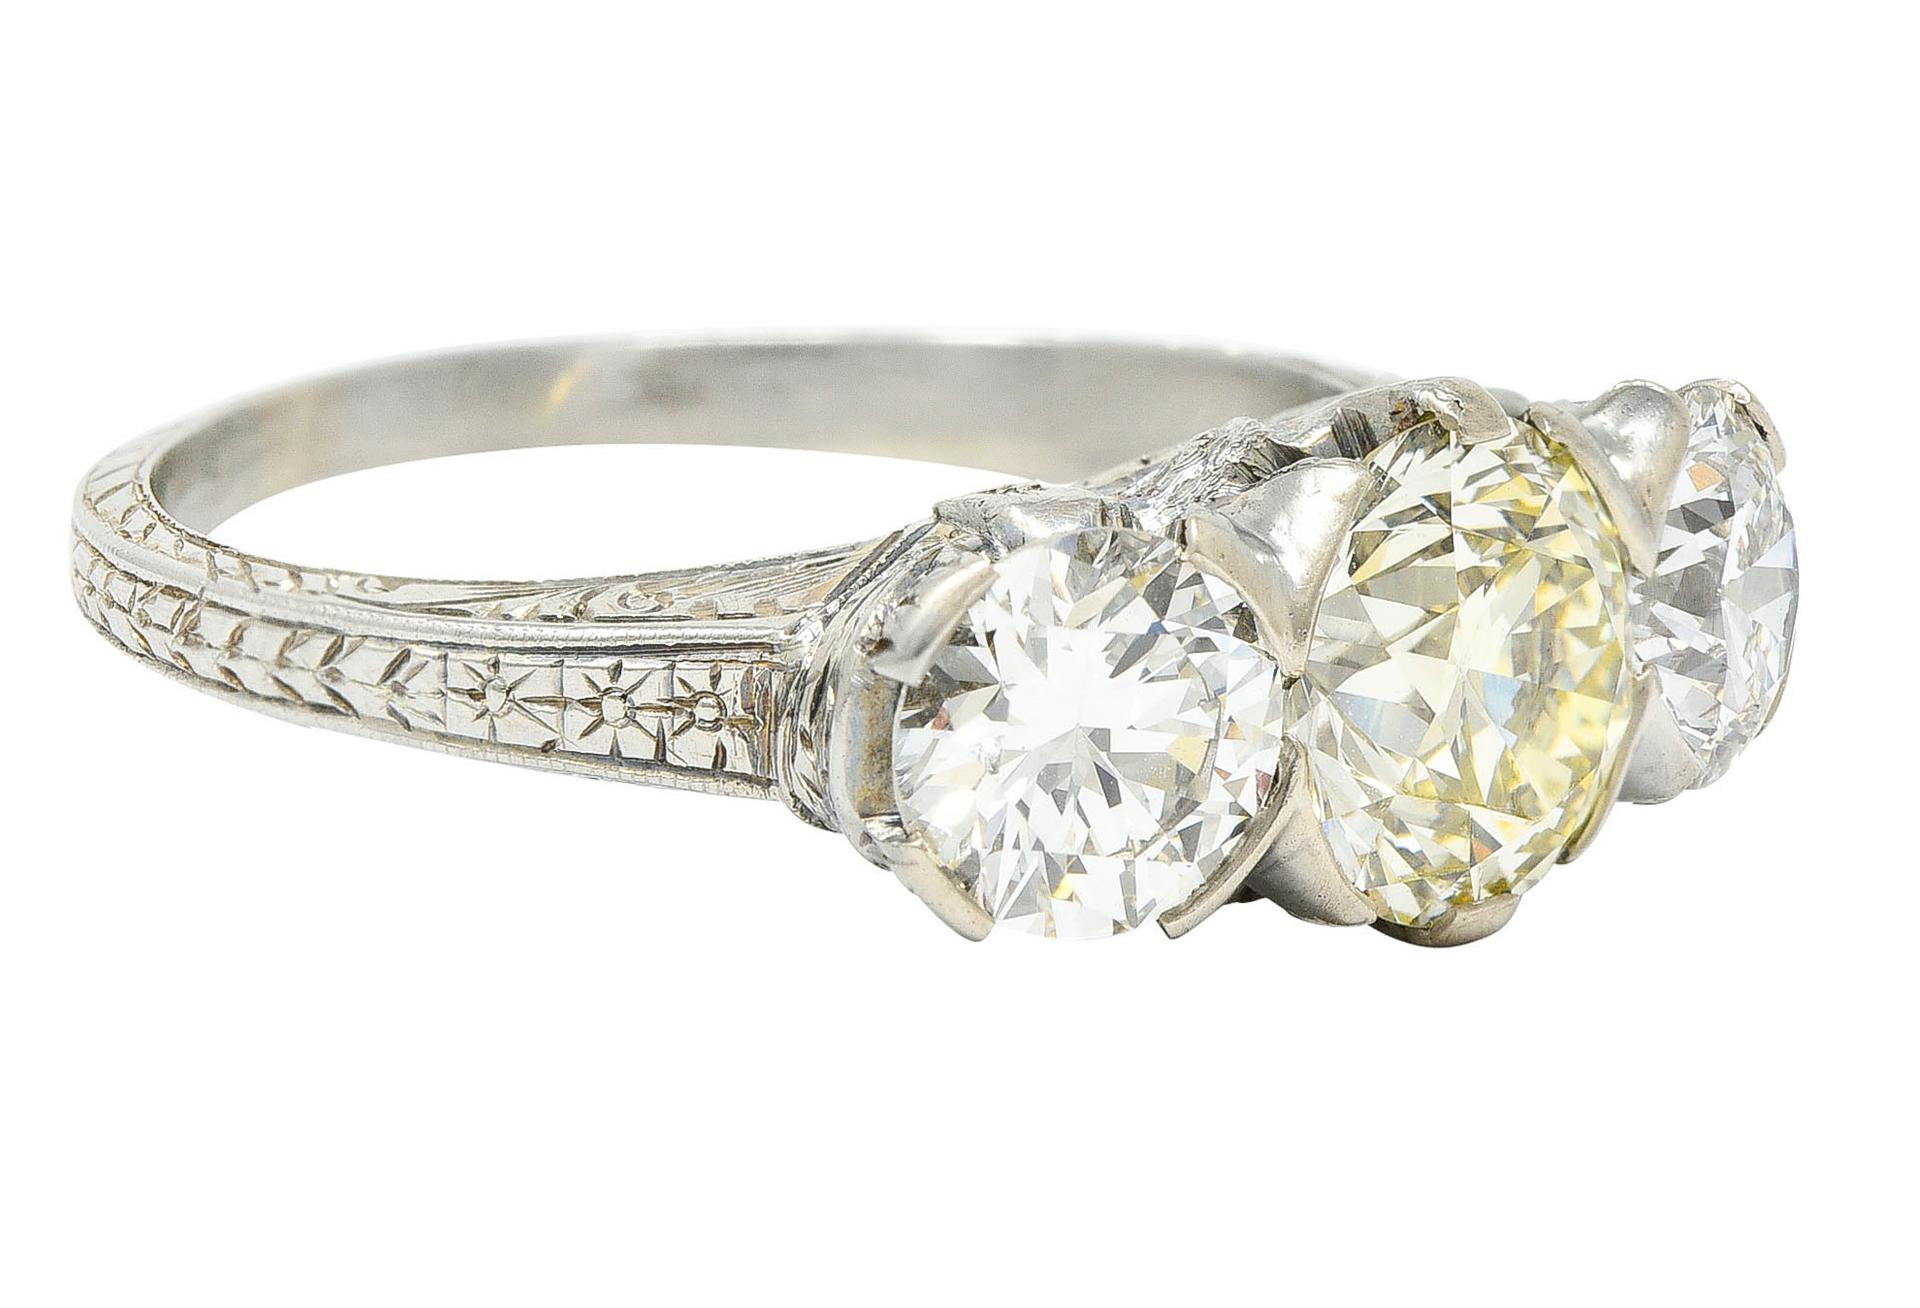 Three stone ring centers a light yellow diamond weighing 1.64 carats - uniform in color with VS clarity

Flanked by two transitional cut diamonds weighing in total approximately 1.56 carats - G/H color with VS and SI clarity

Set by wide decorative